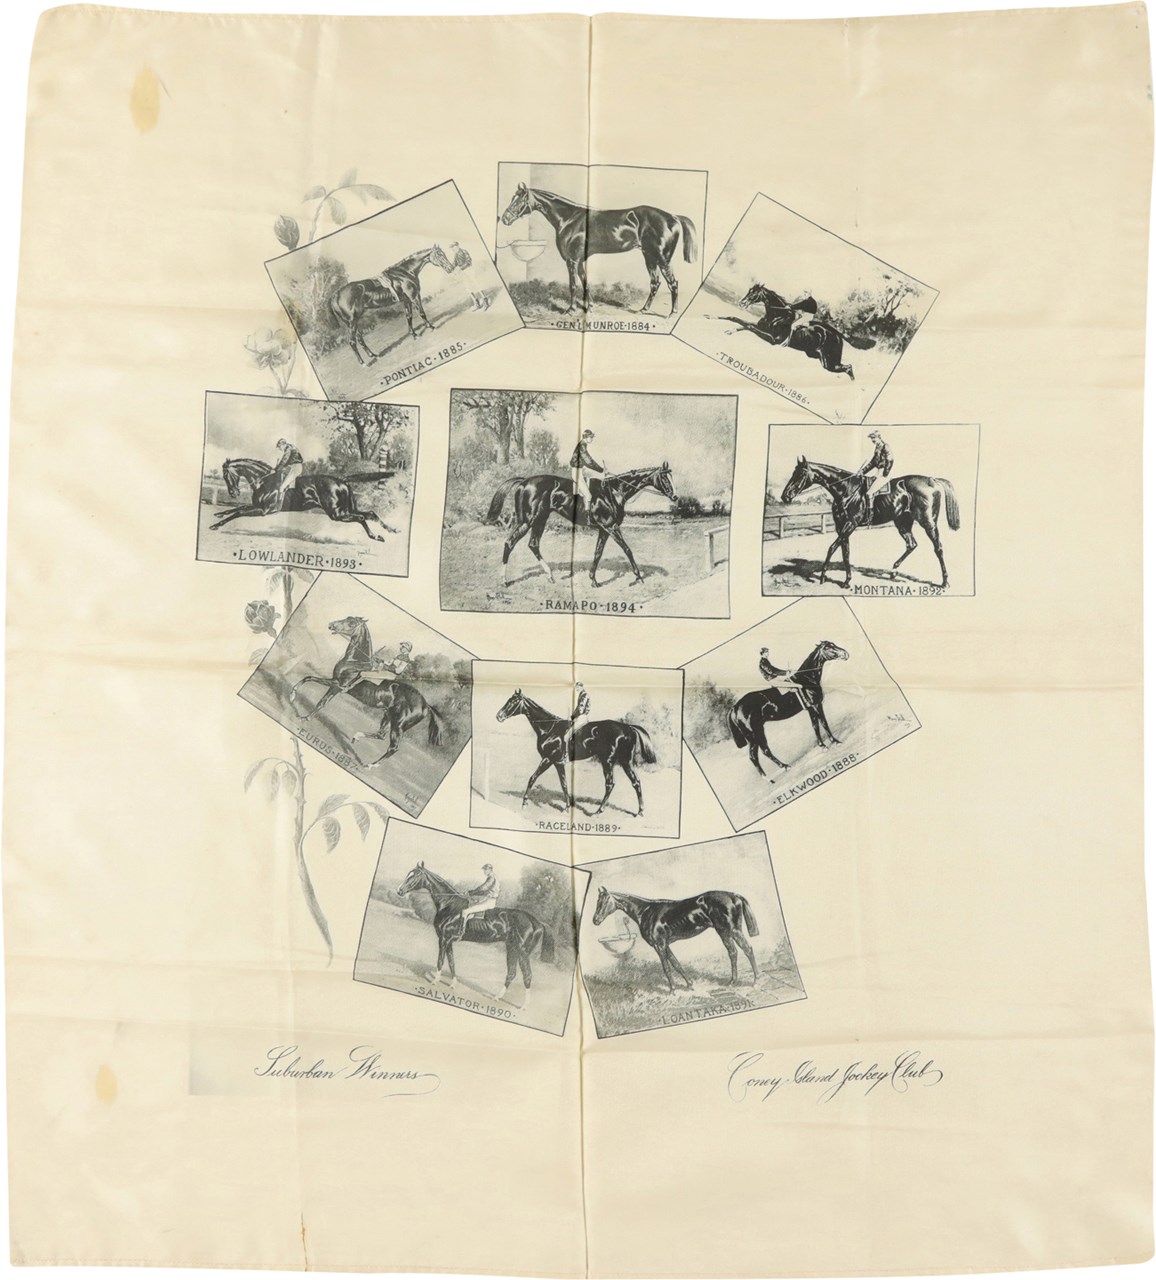 Stunning Silk Showing the 11 Winners of the Suburban Handicap from 1884 Through 1894